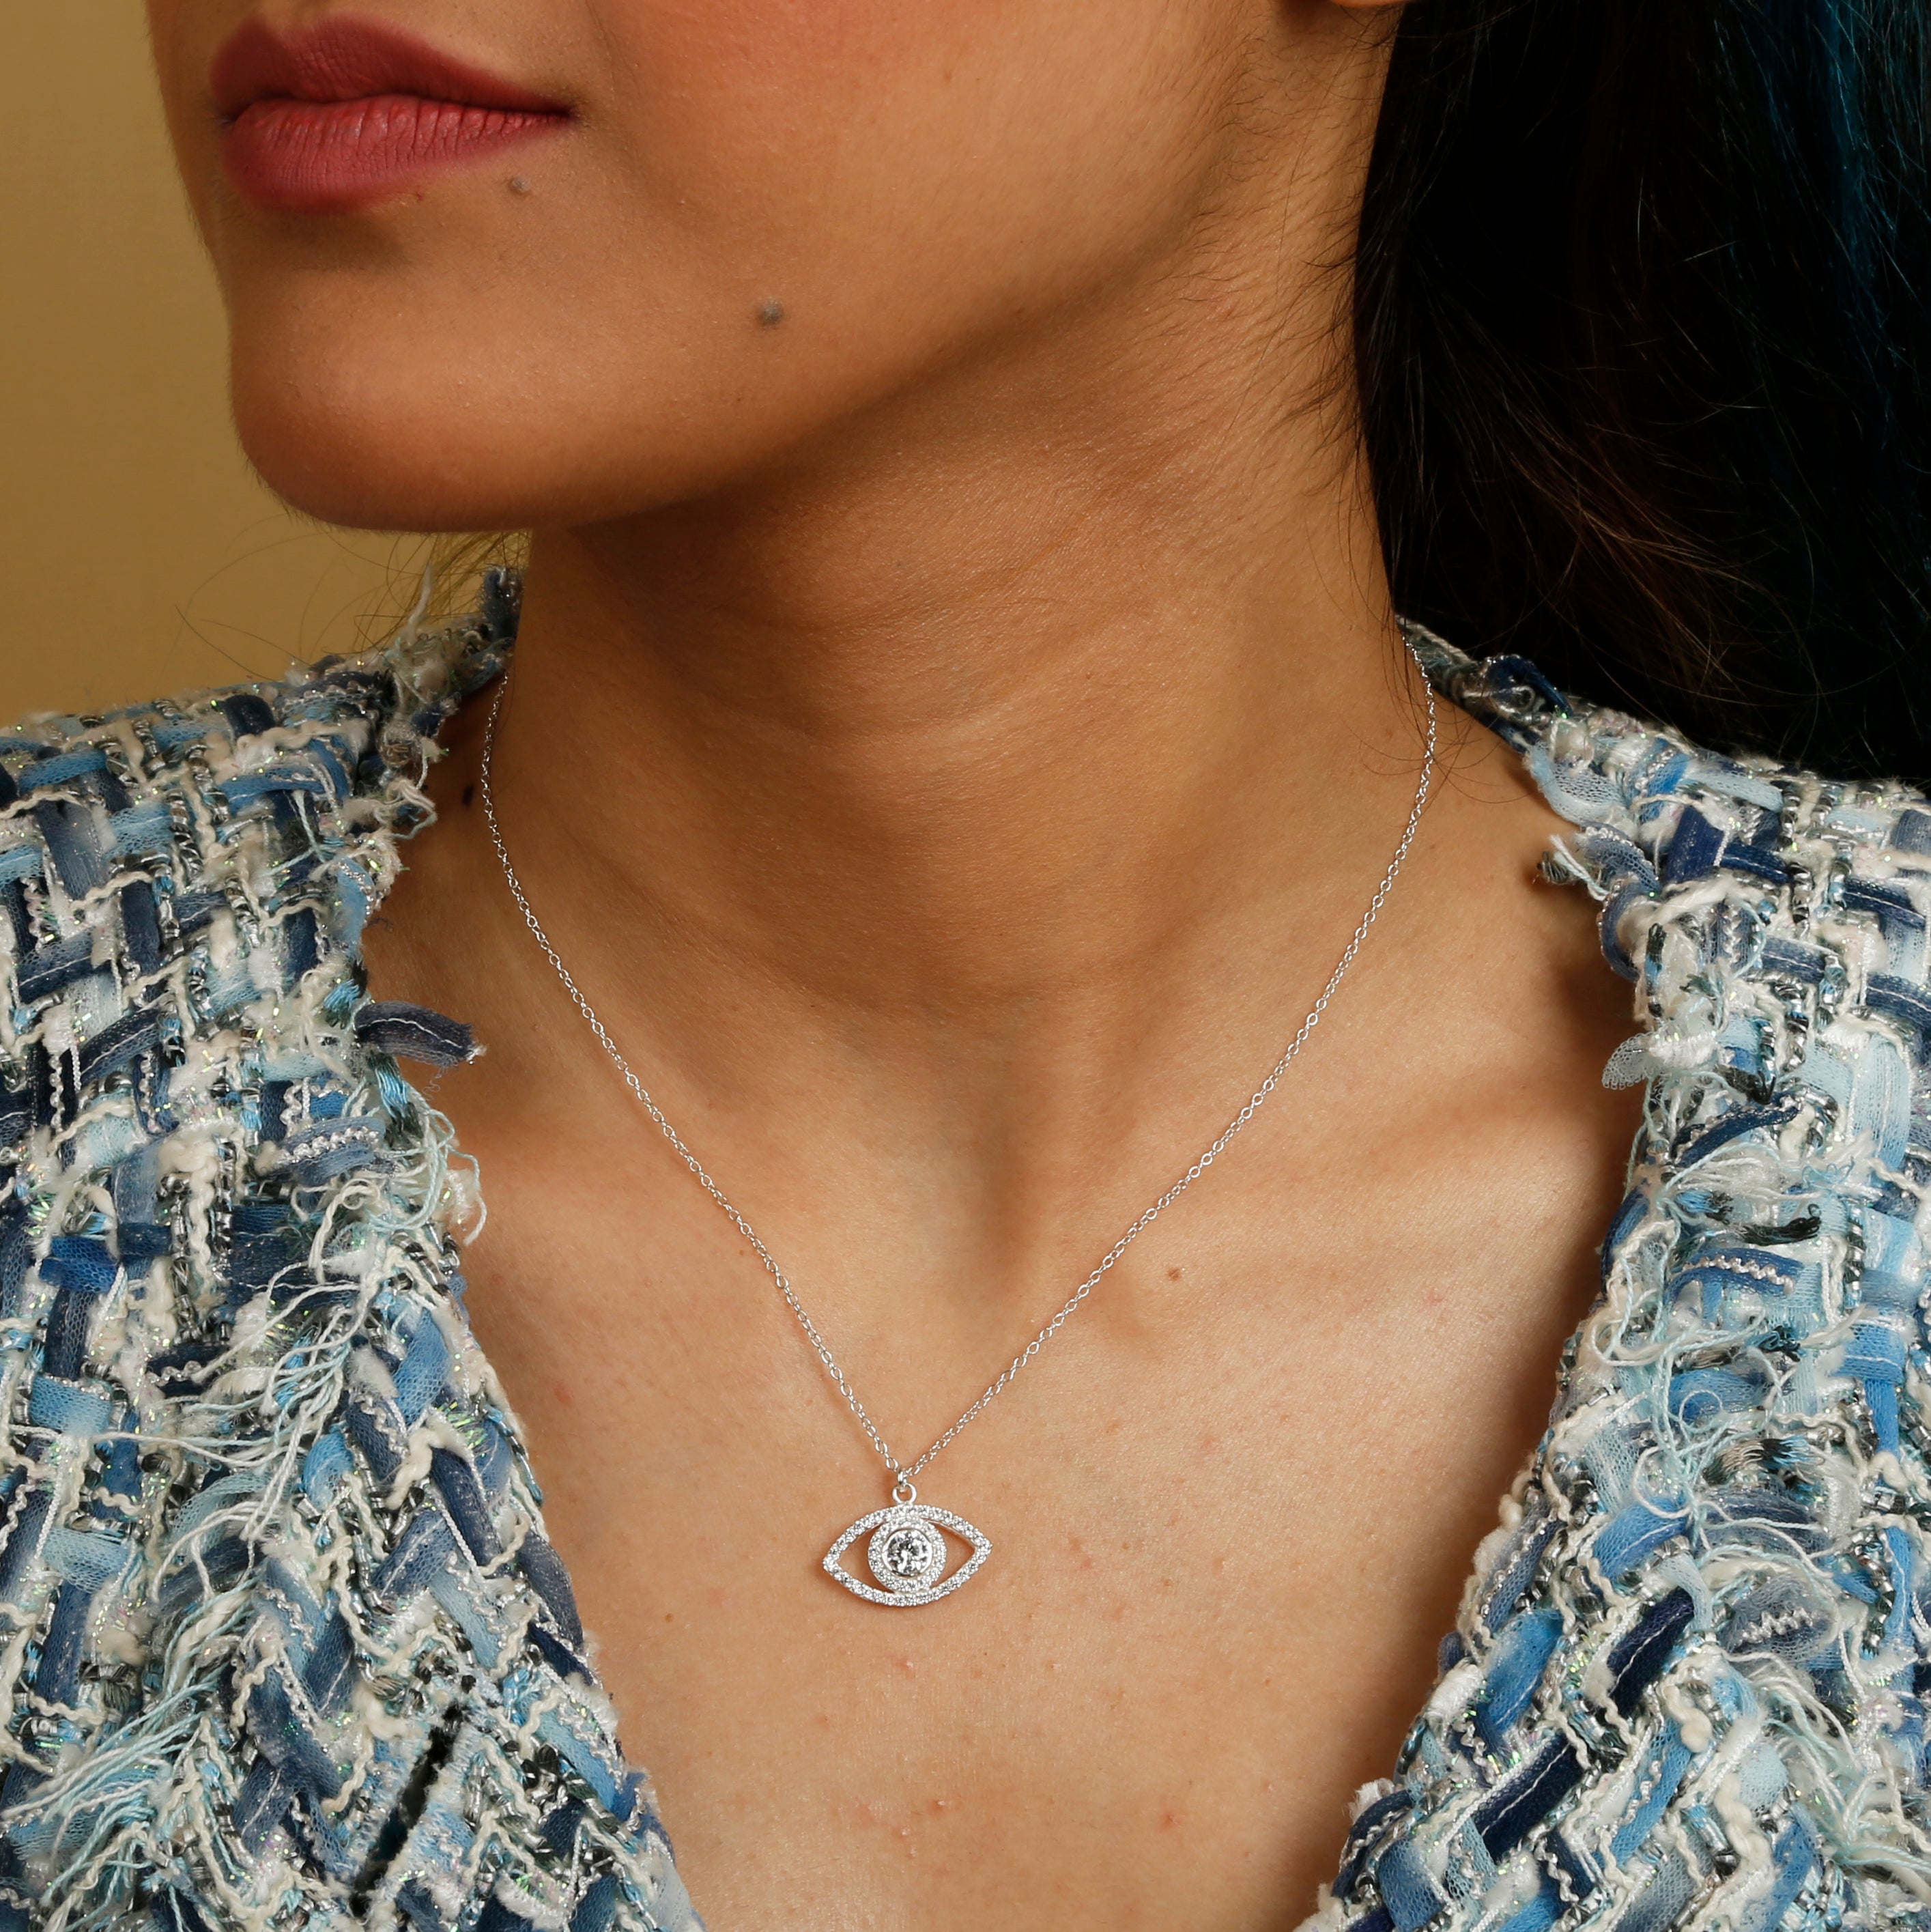 The Classic Evil Eye Necklace